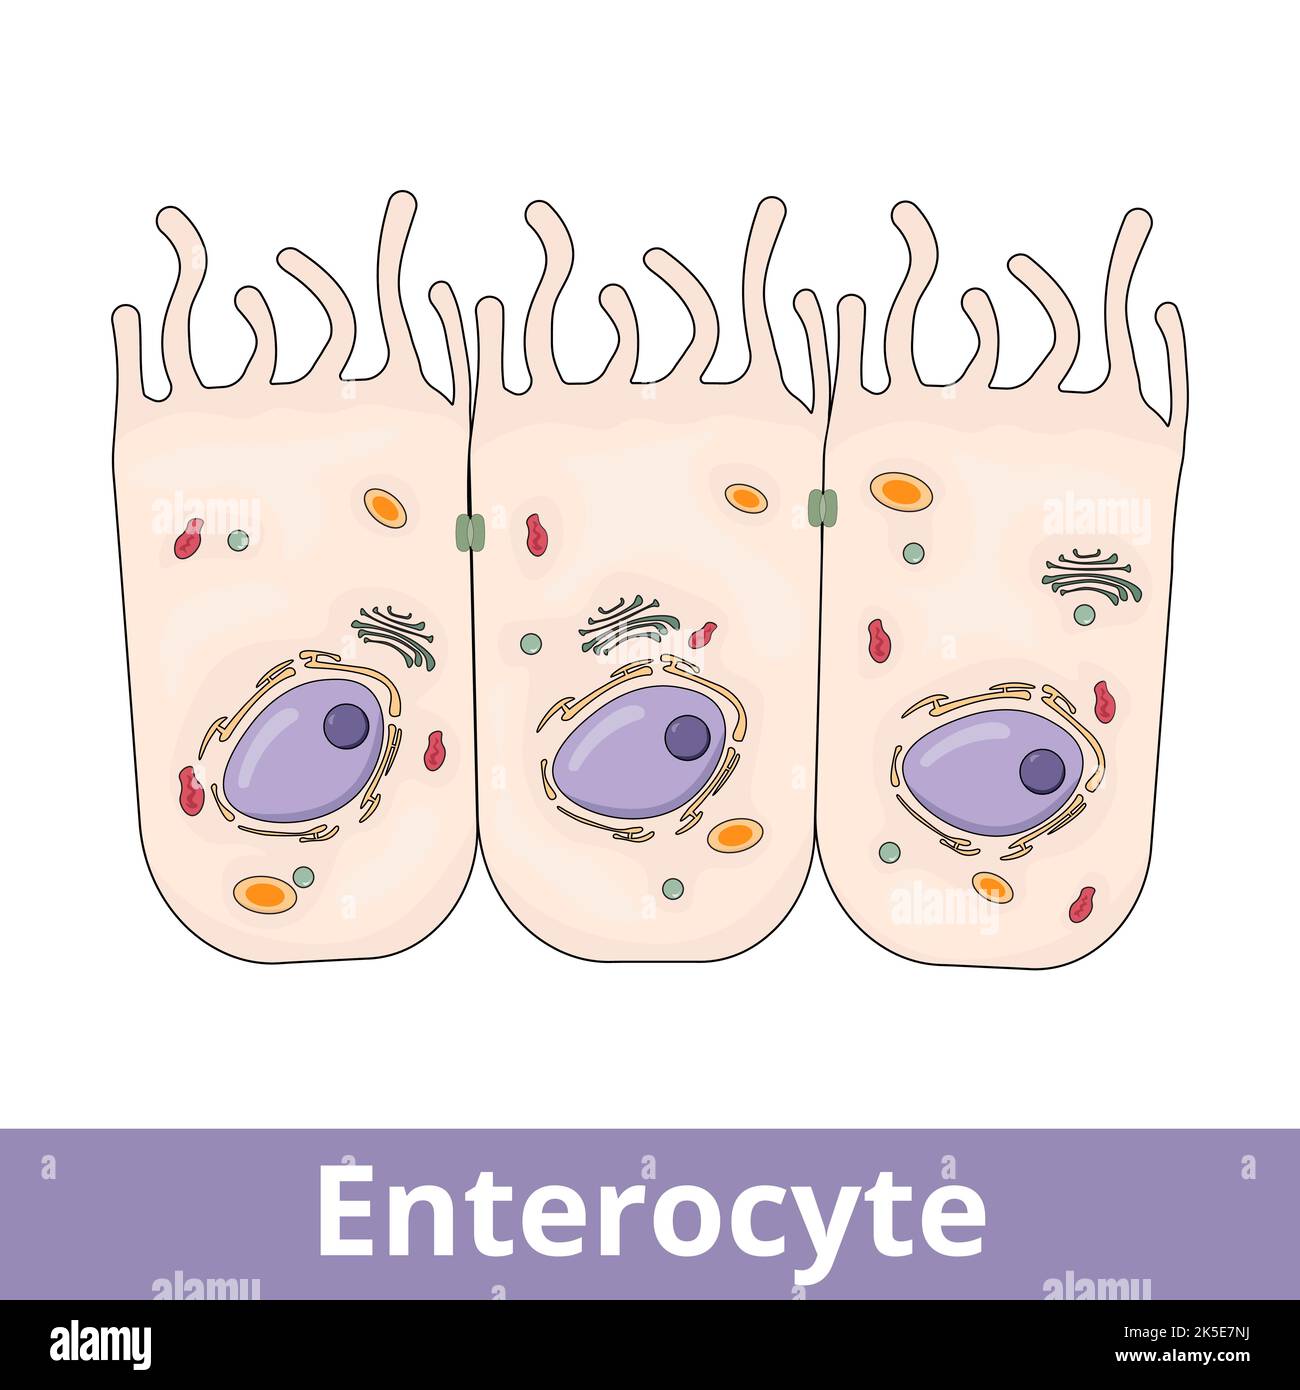 Enterocyte. Intestinal absorptive cells, are simple columnar epithelial cells which line the inner surface of the small and large intestines. Stock Vector